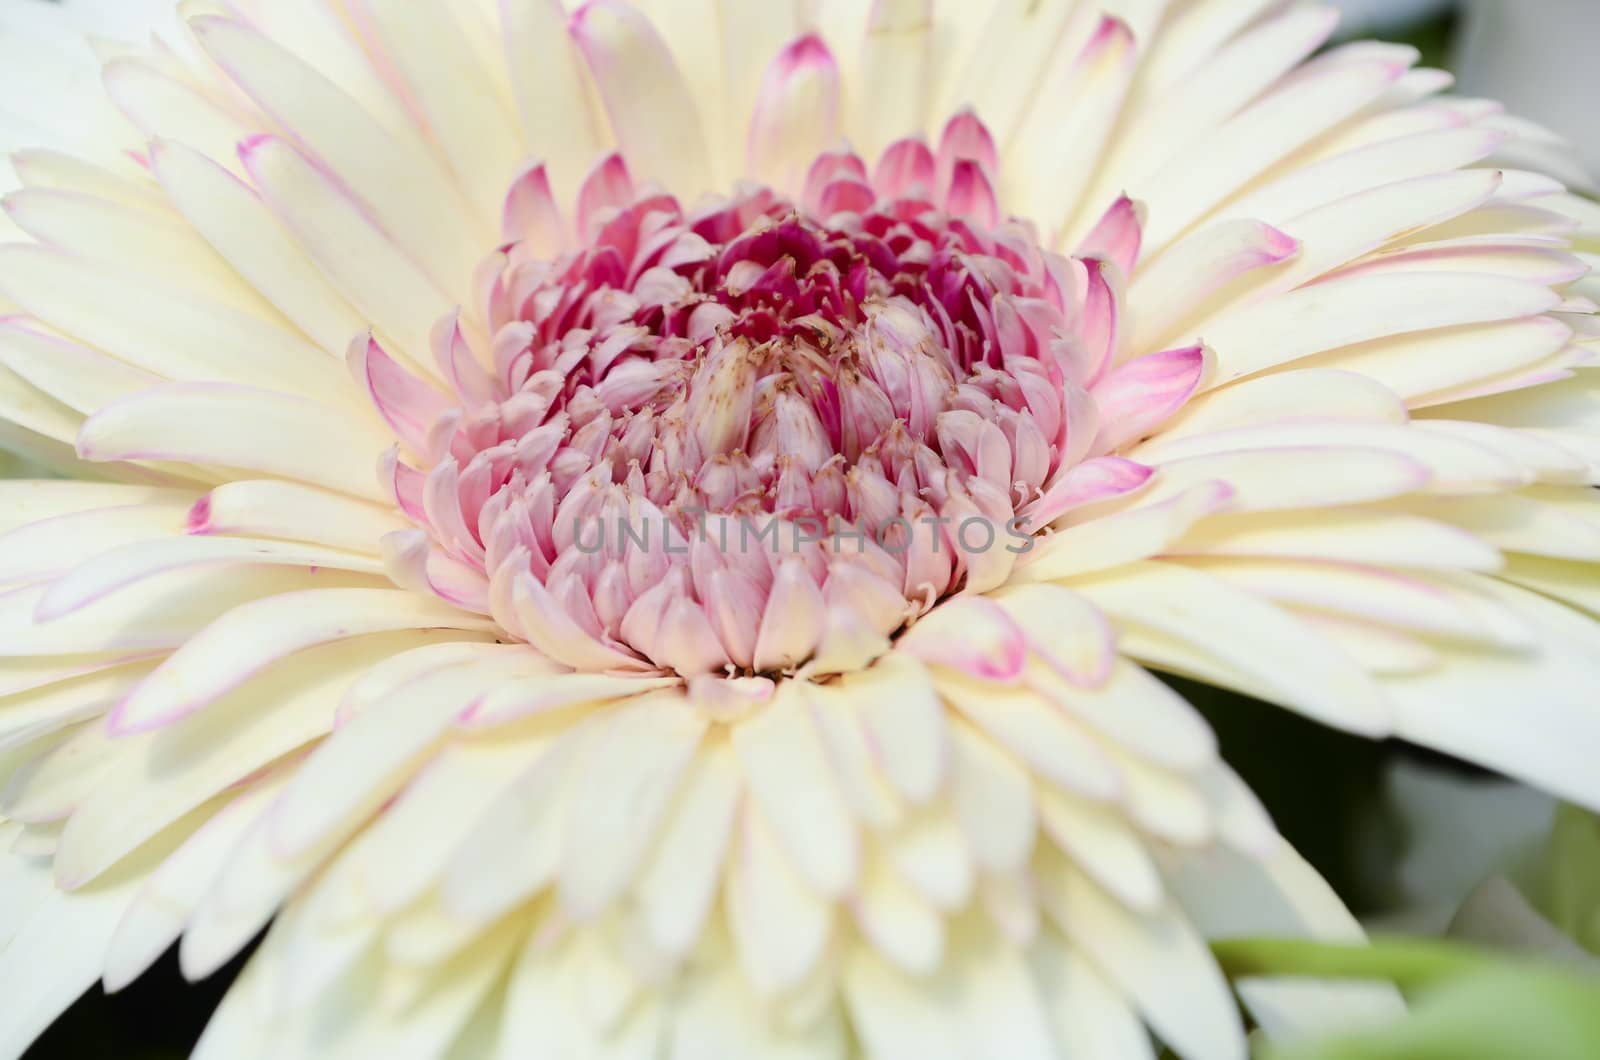 Close-up of white and pink daisy